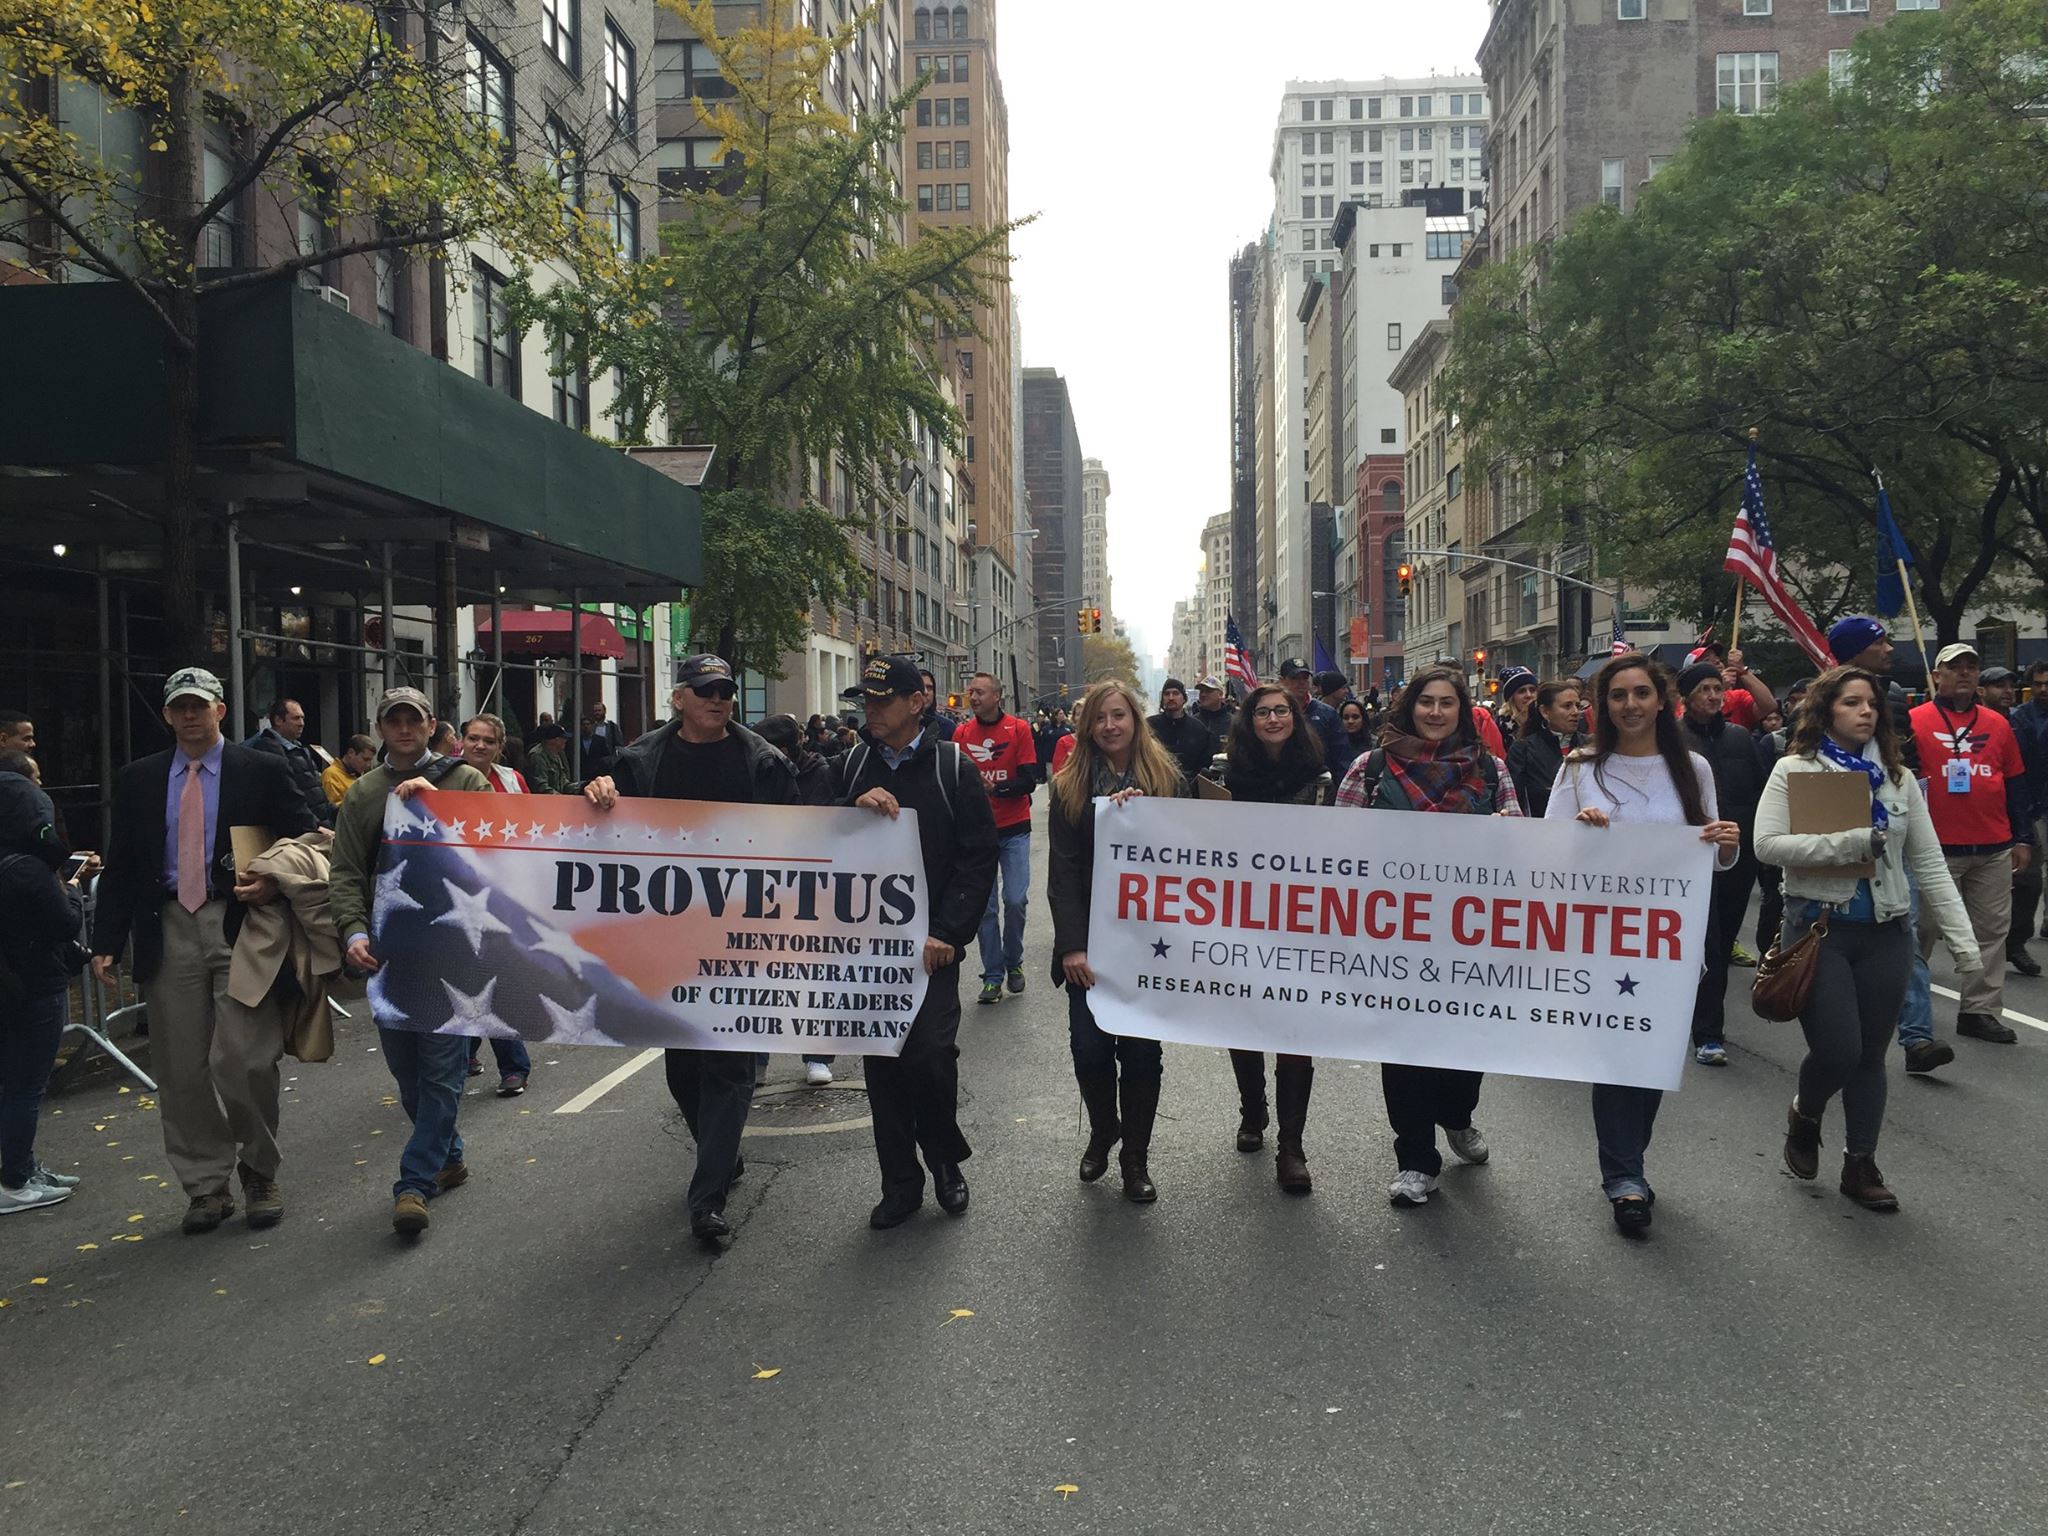 Walking with PROVETUS and Resilience Center banners